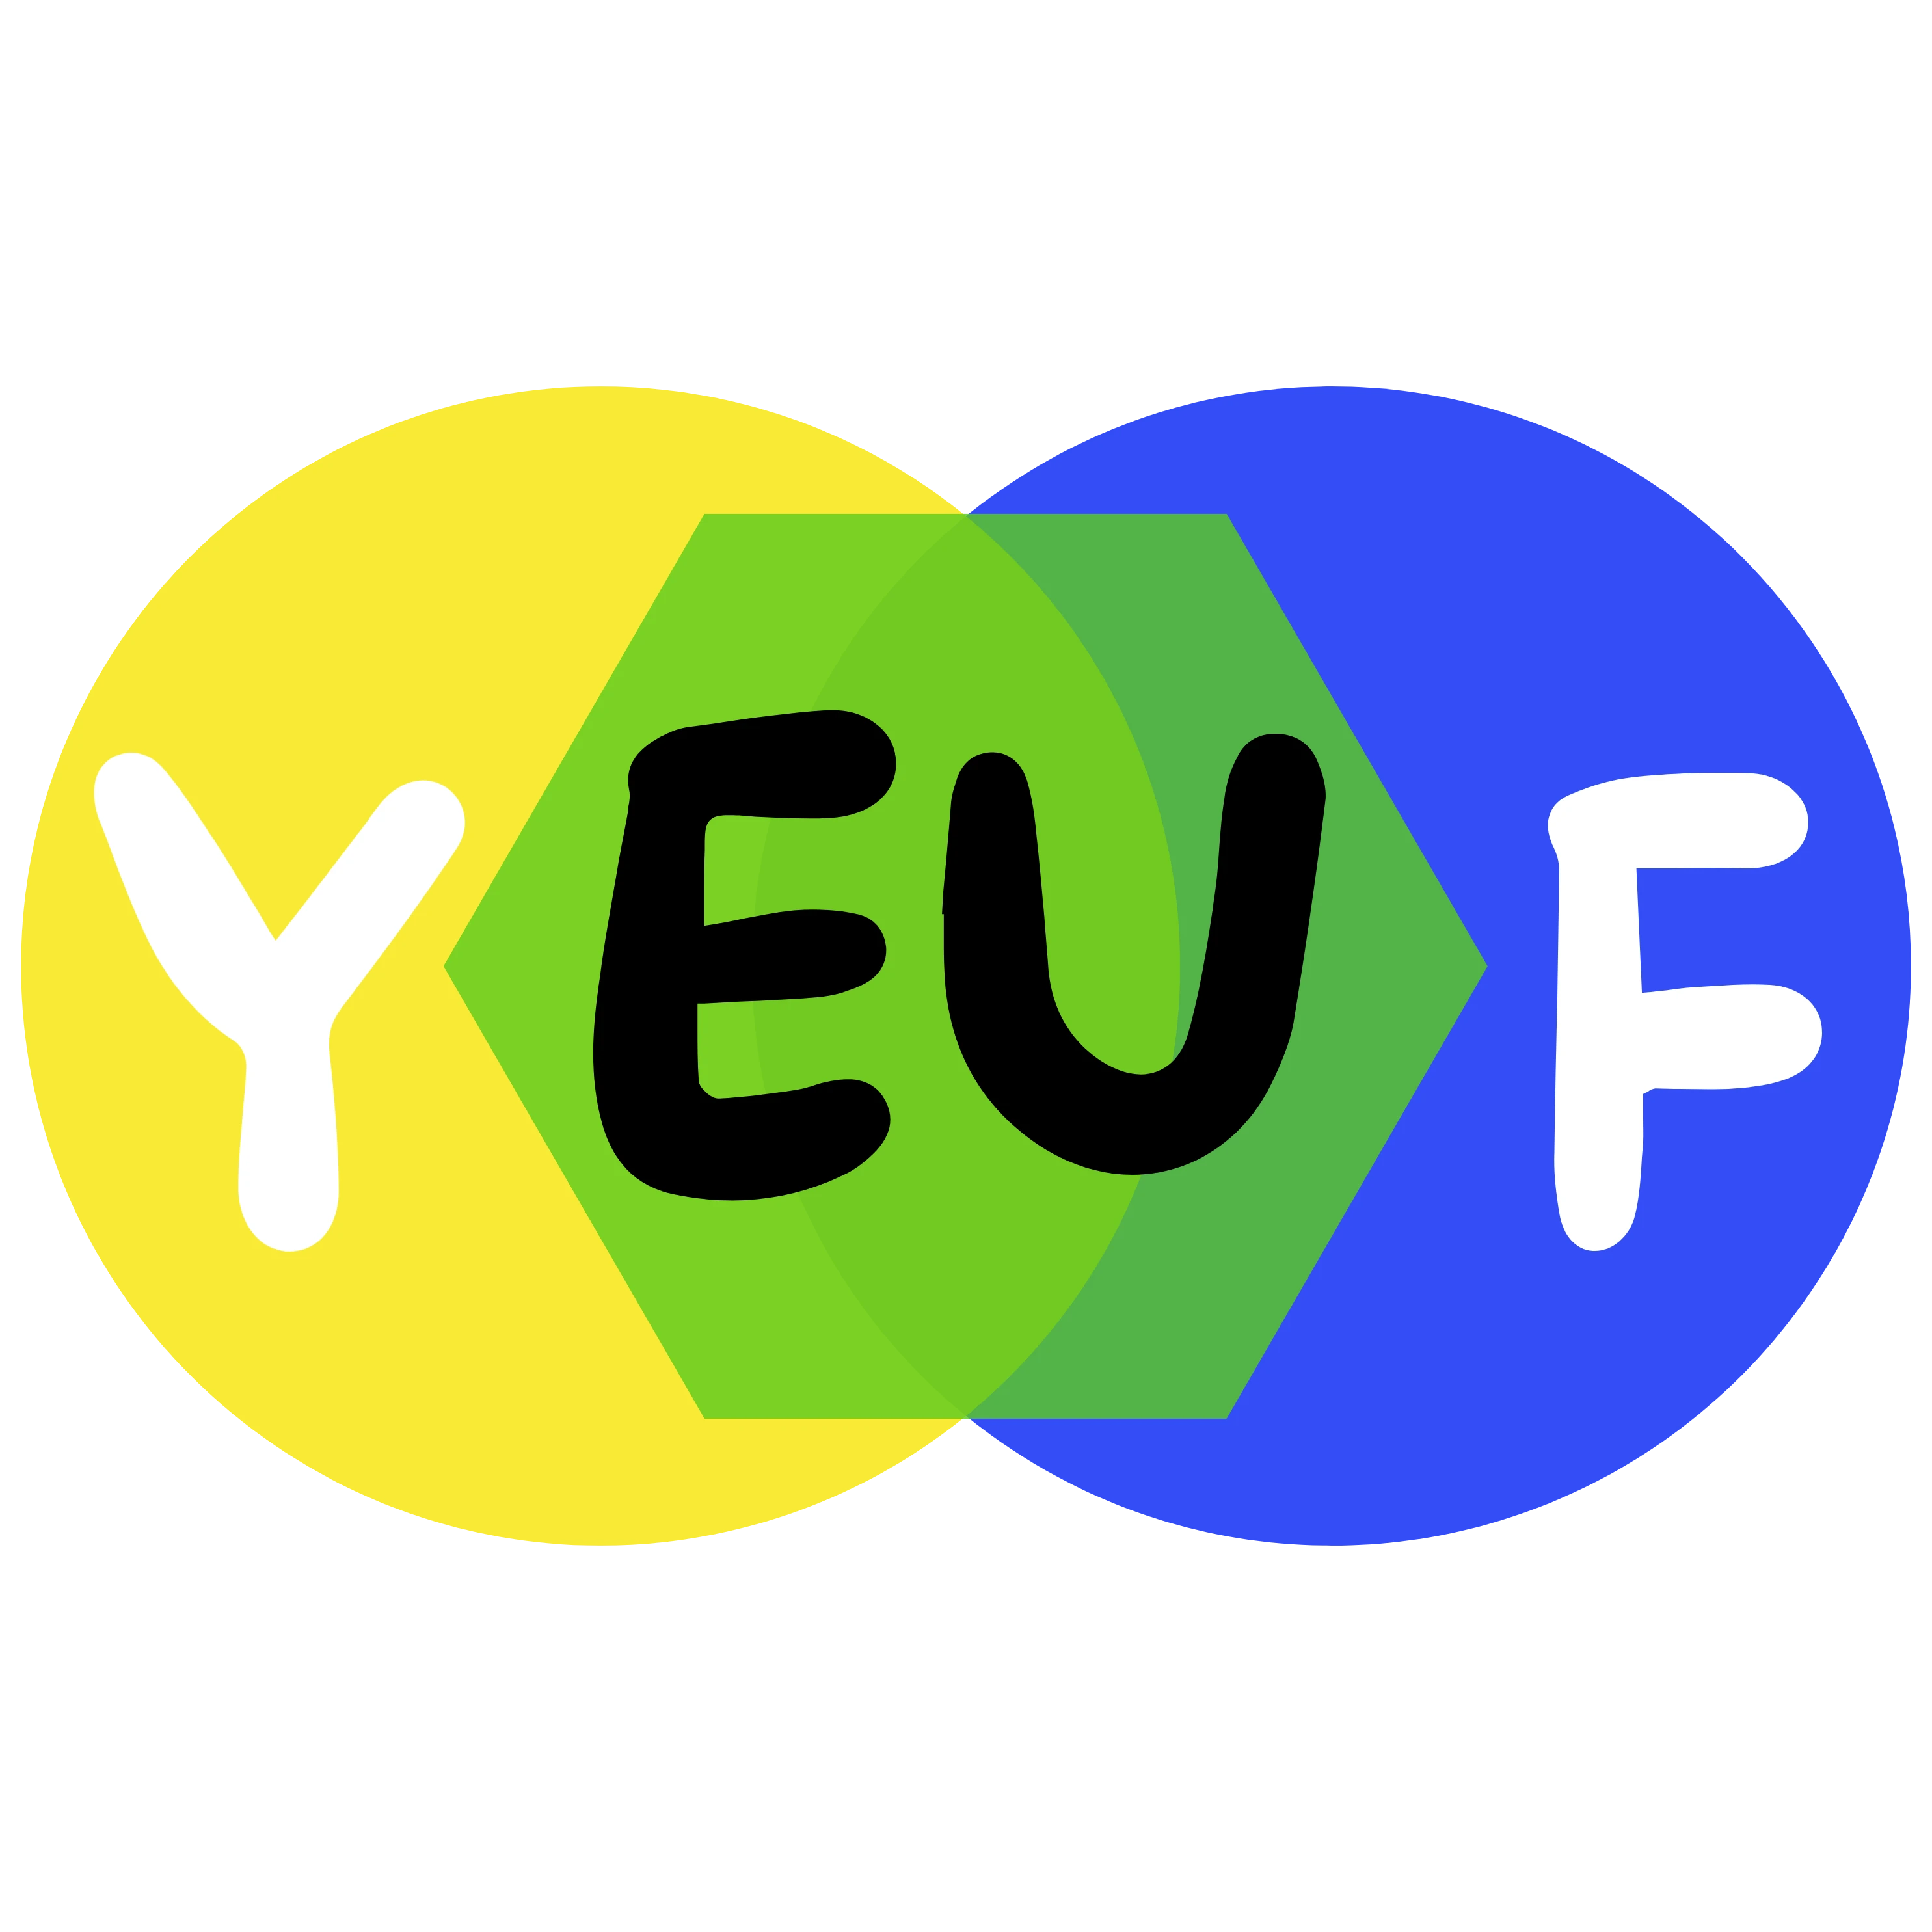 389-yeuf-project-logo-high-res-17061122003125.png